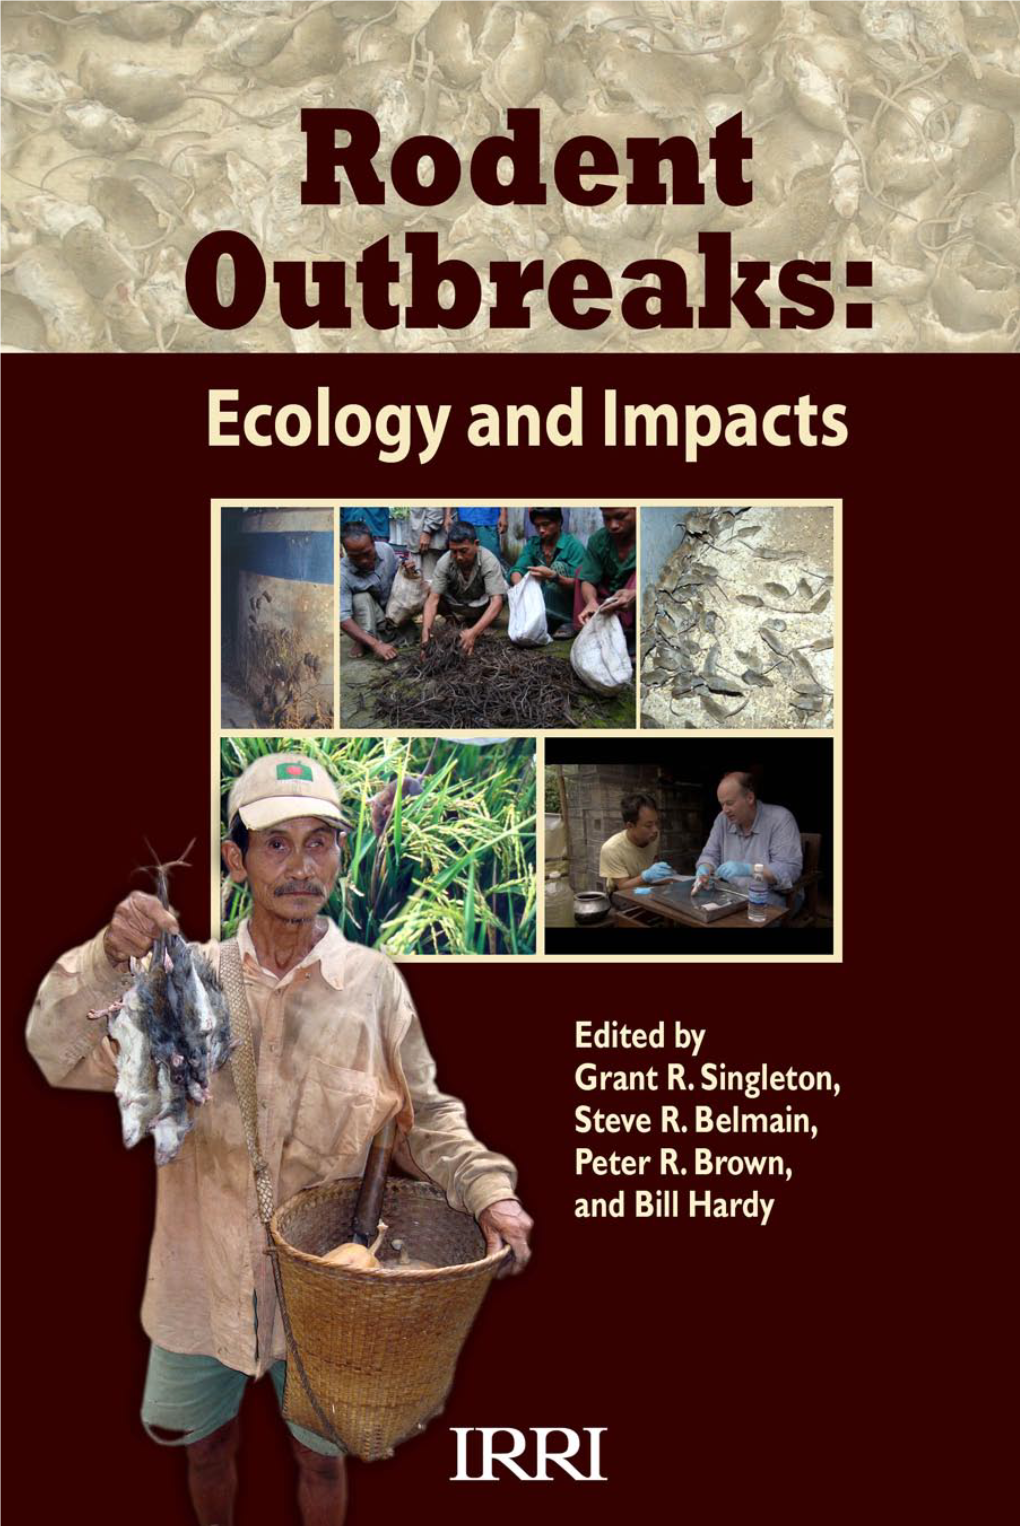 Rodent Outbreaks: Ecology and Impacts